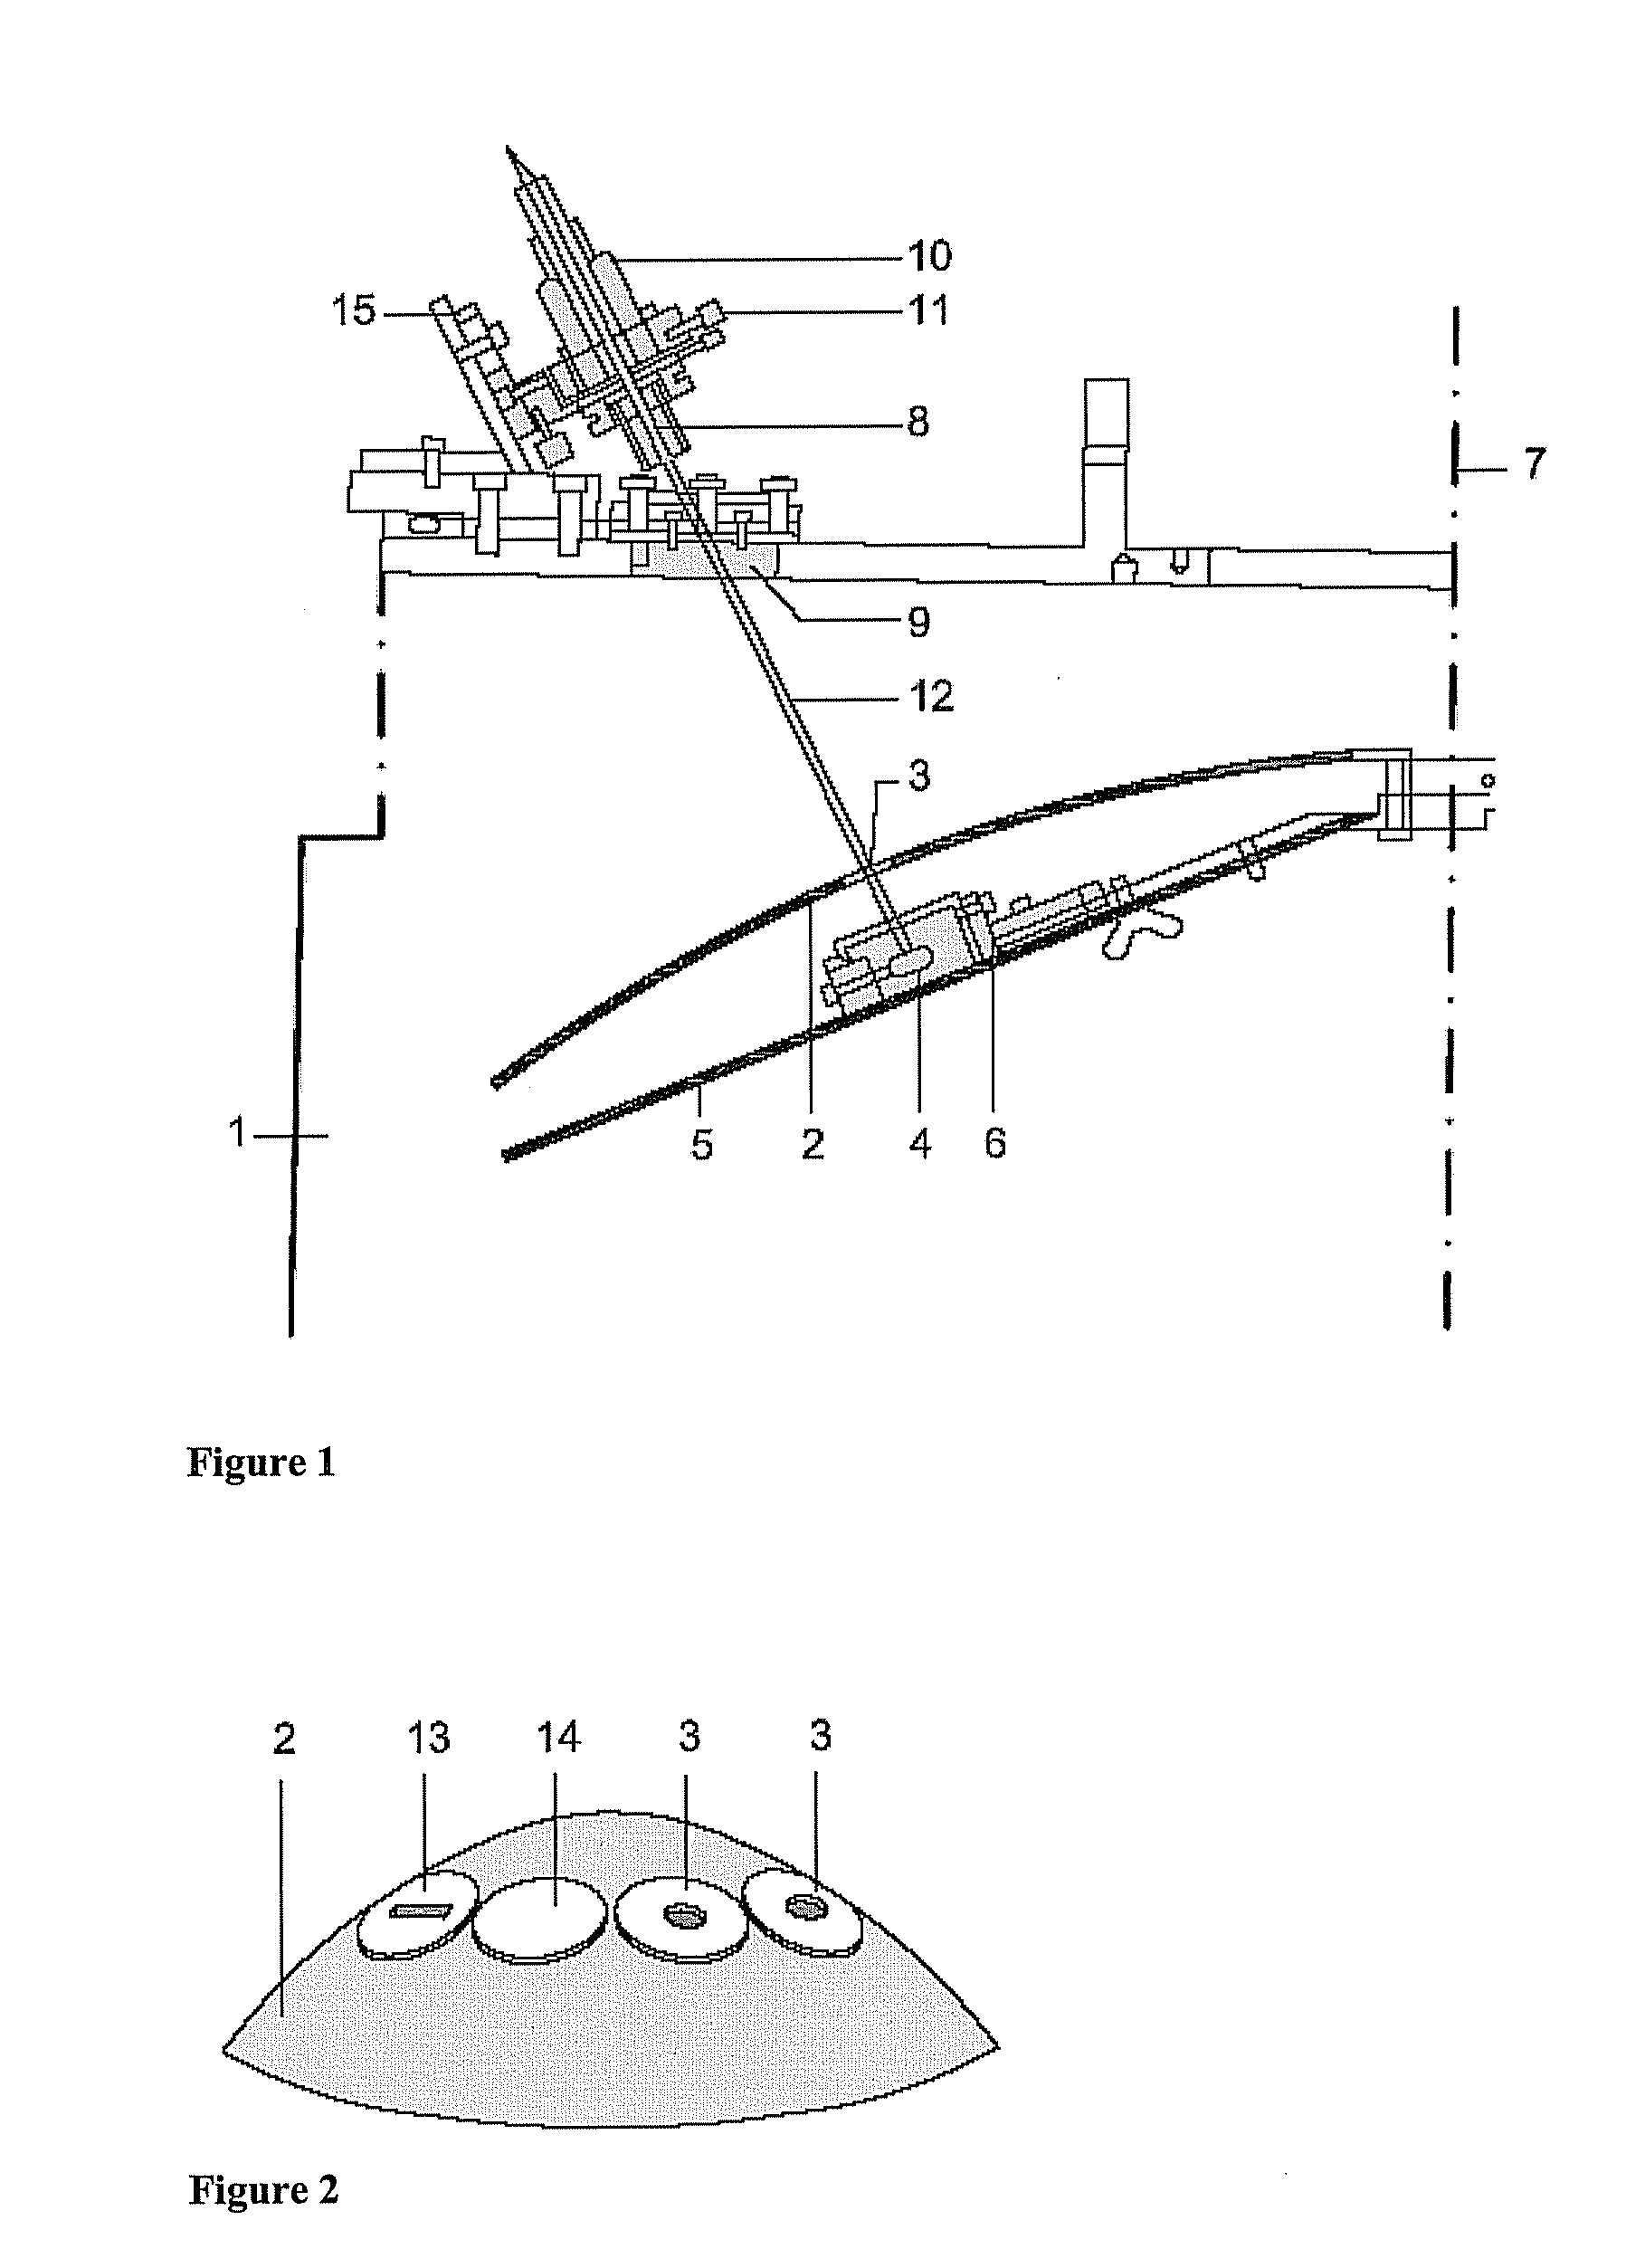 Measuring System for Optical Monitoring of Coating Processes